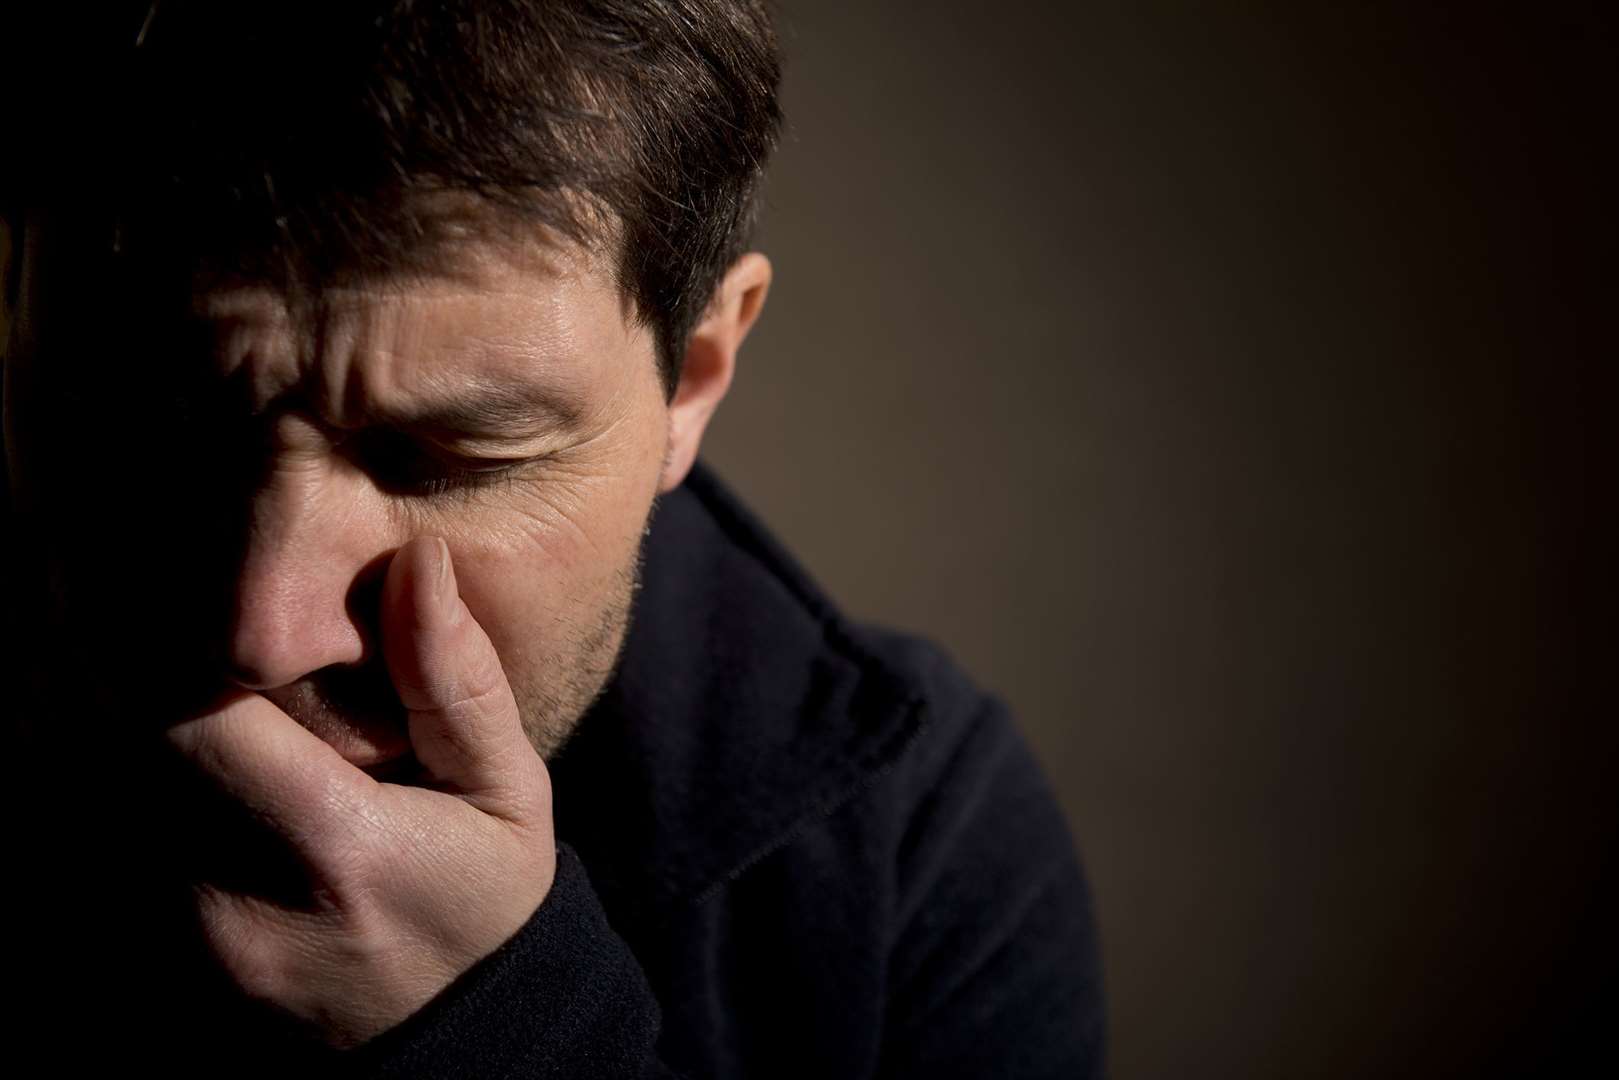 Volunteers learn how to support clients who can be tearful and distraught. Stock picture